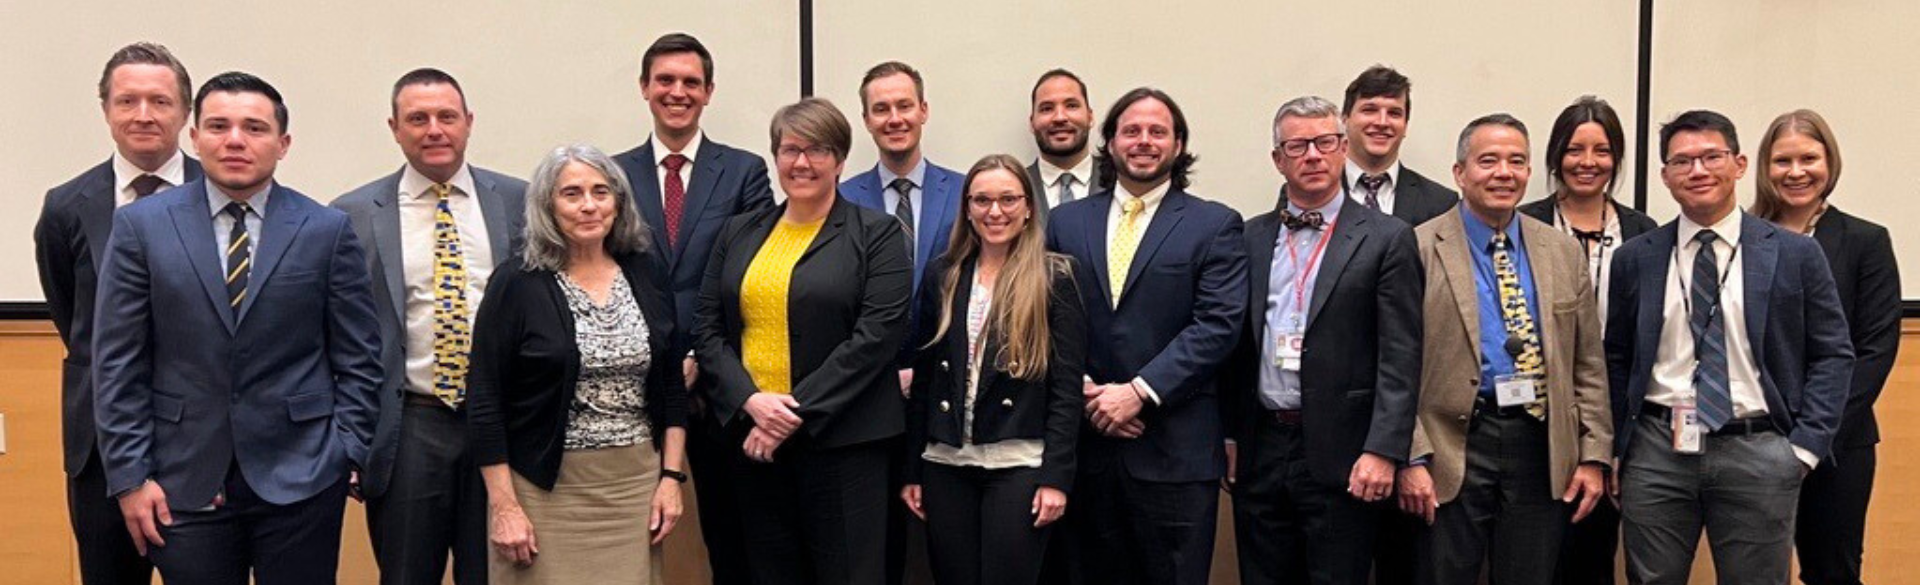 Surgery Residents Present Research Findings at 10th Annual Symposium